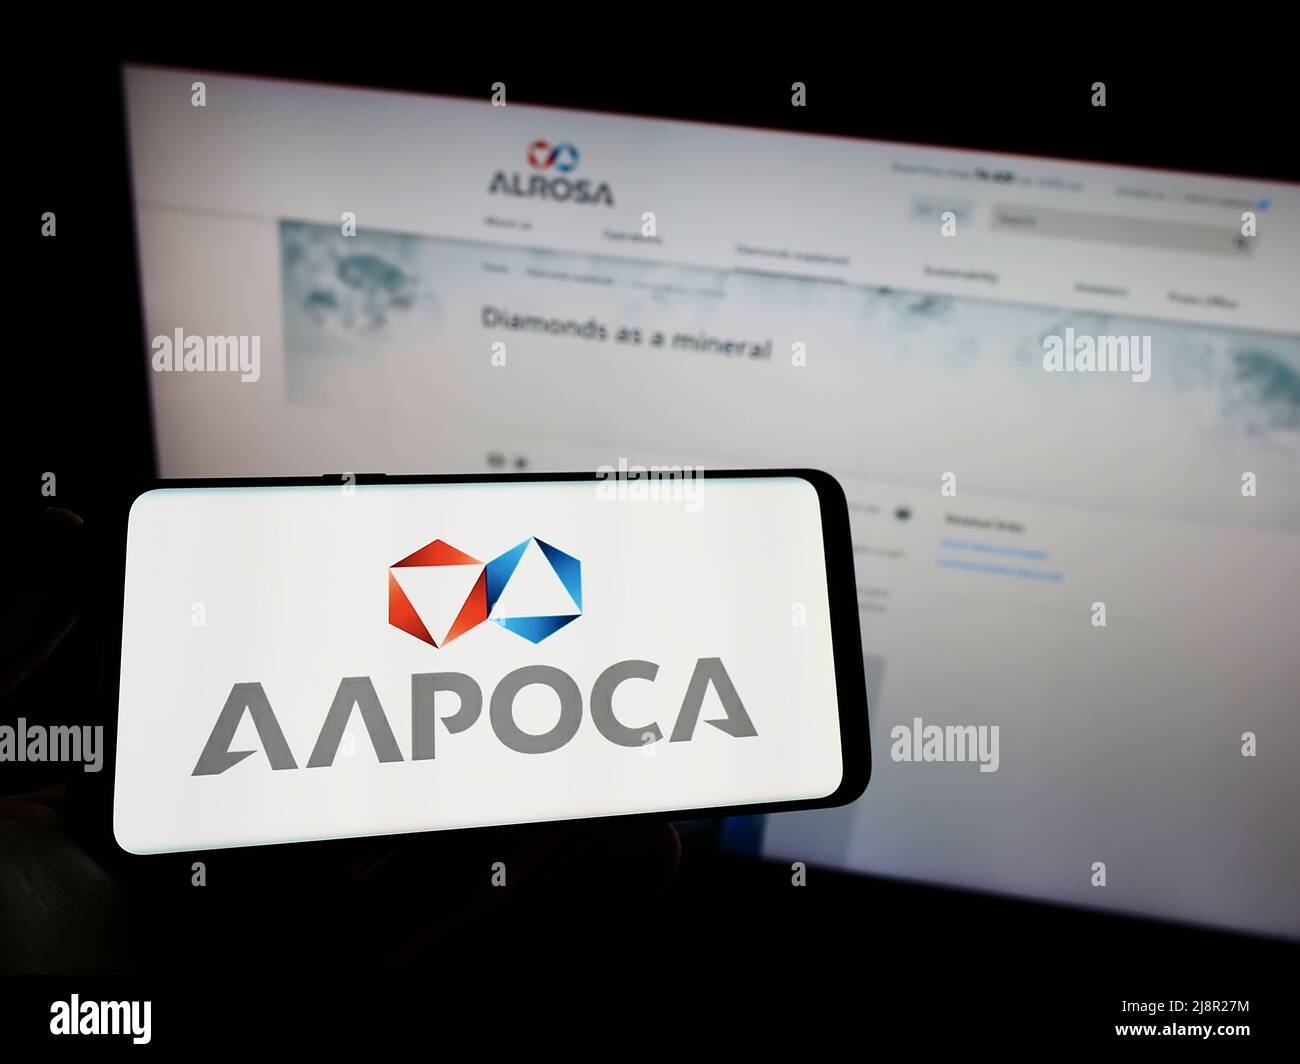 Person holding mobile phone with logo of Russian diamond mining company Alrosa PJSC on screen in front of web page. Focus on phone display. Stock Photo